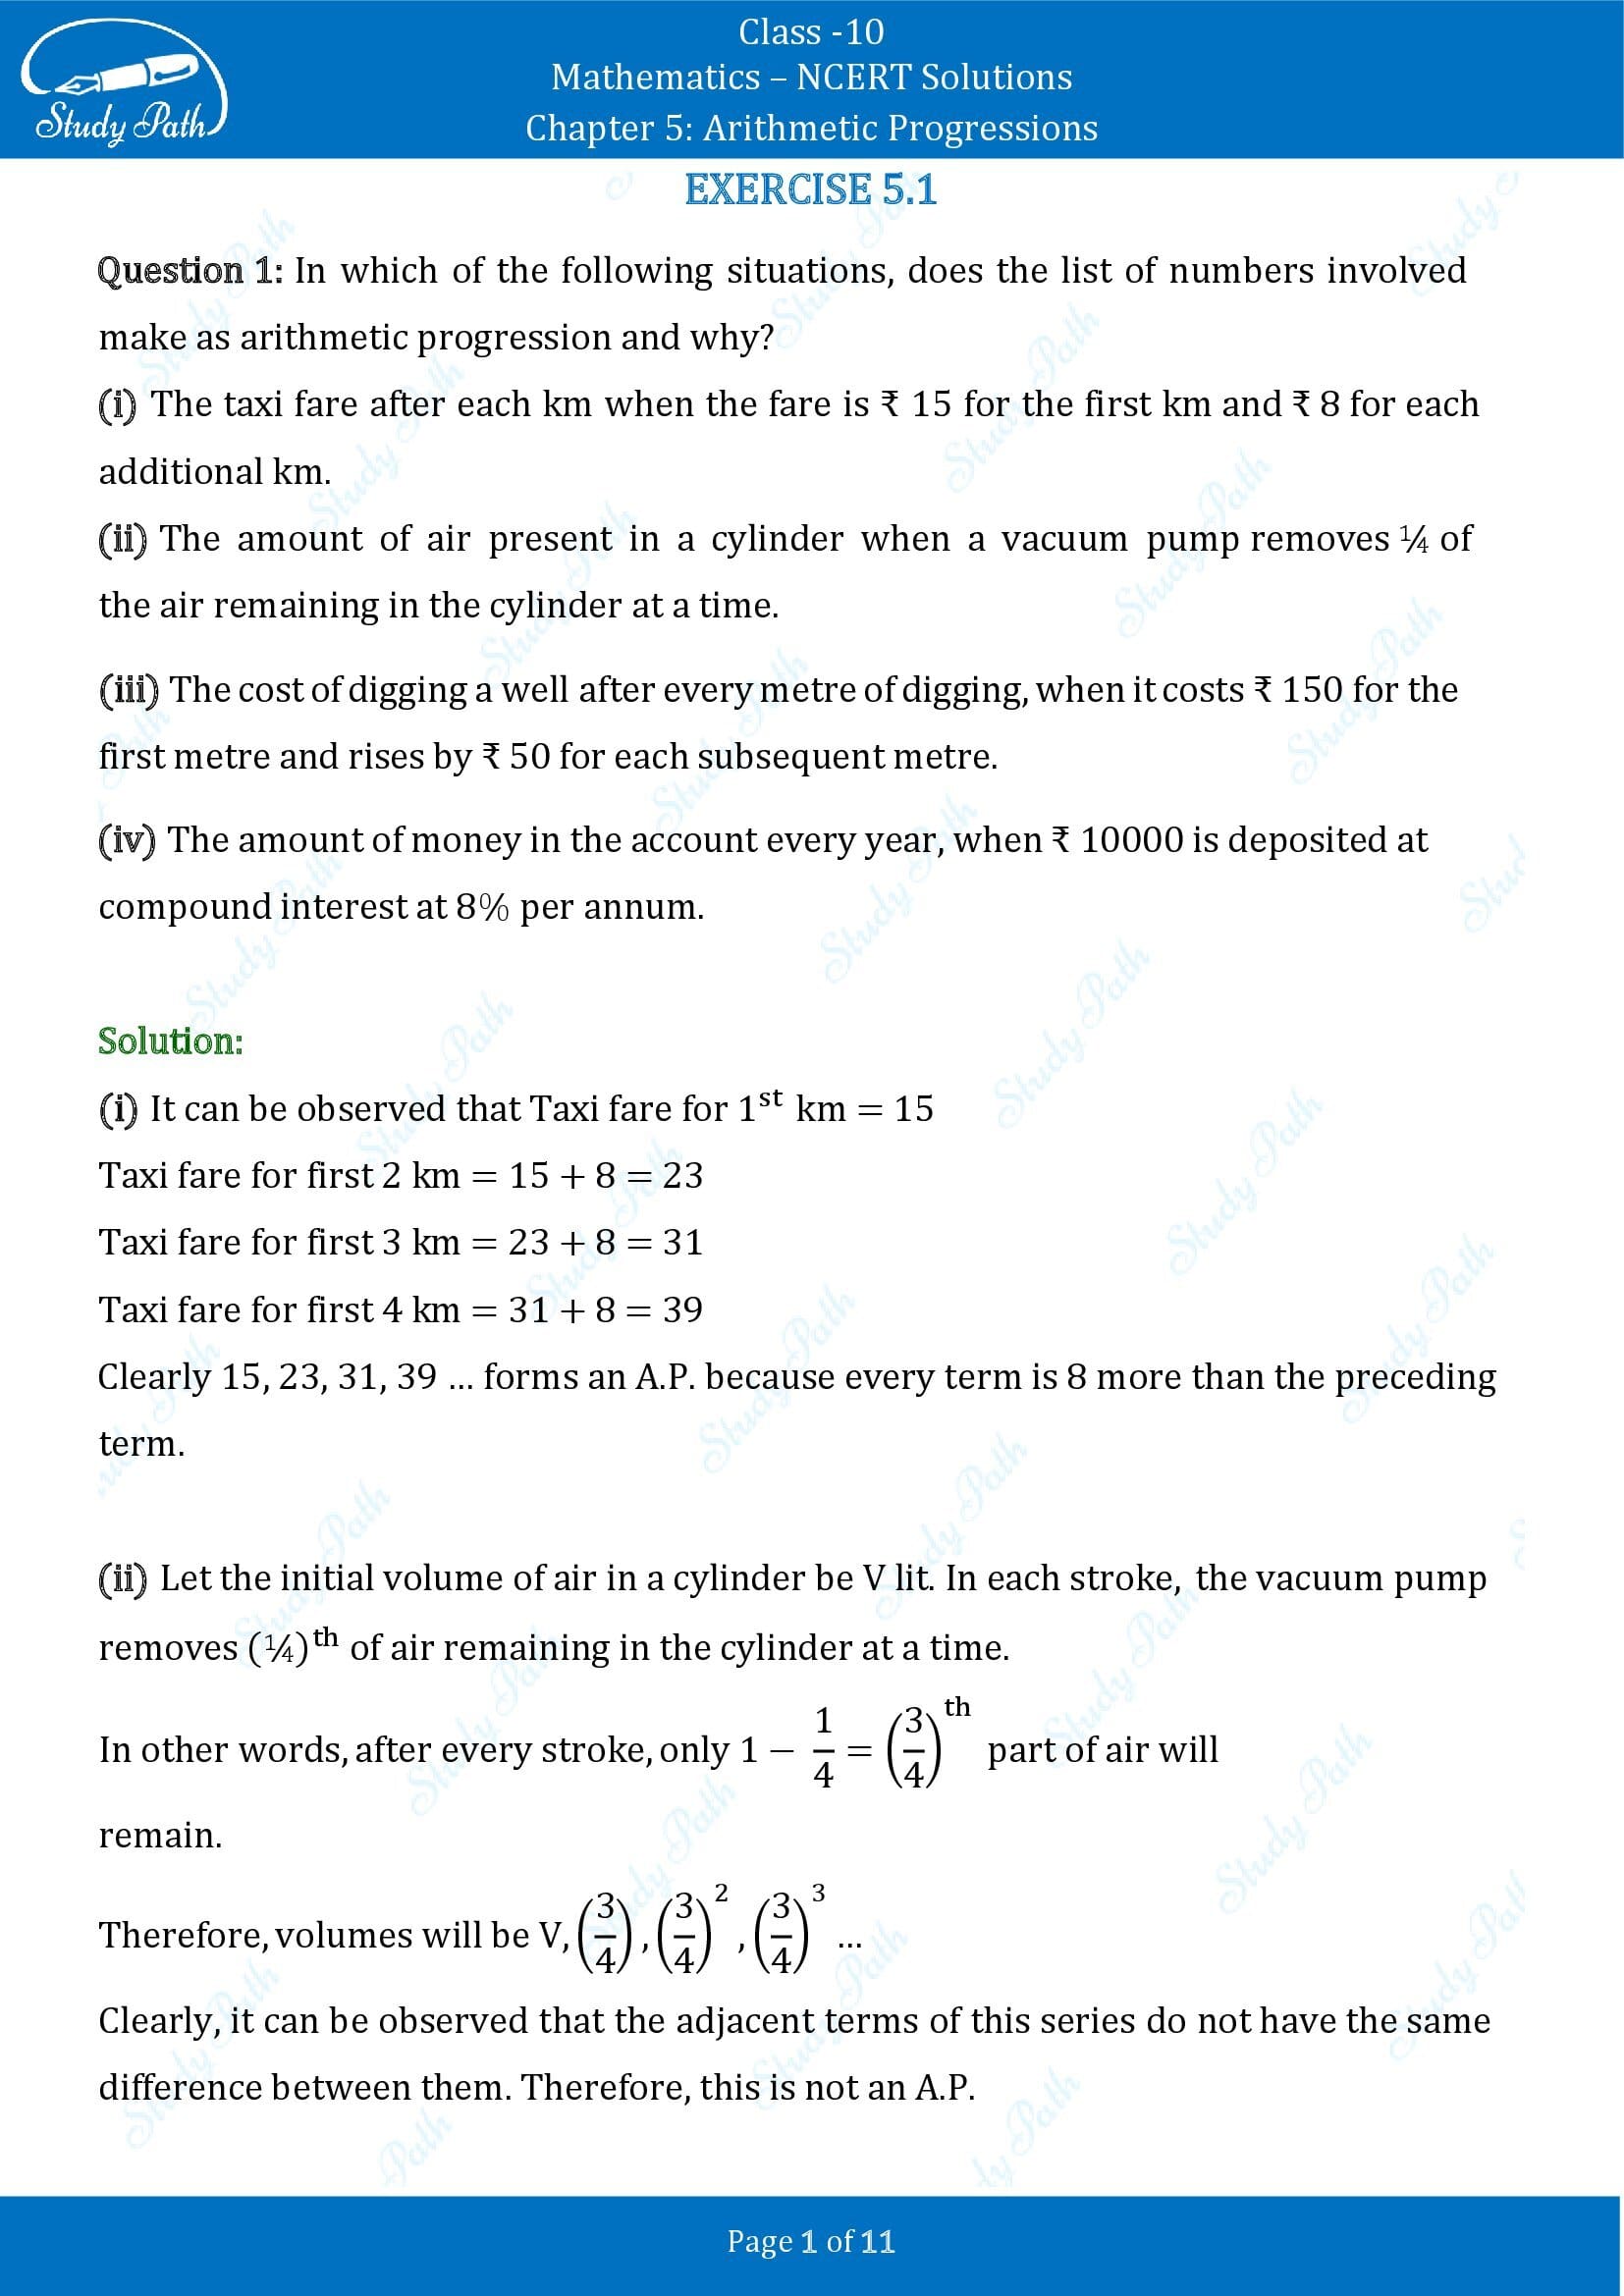 NCERT Solutions for Class 10 Maths Chapter 5 Arithmetic Progressions Exercise 5.1 00001